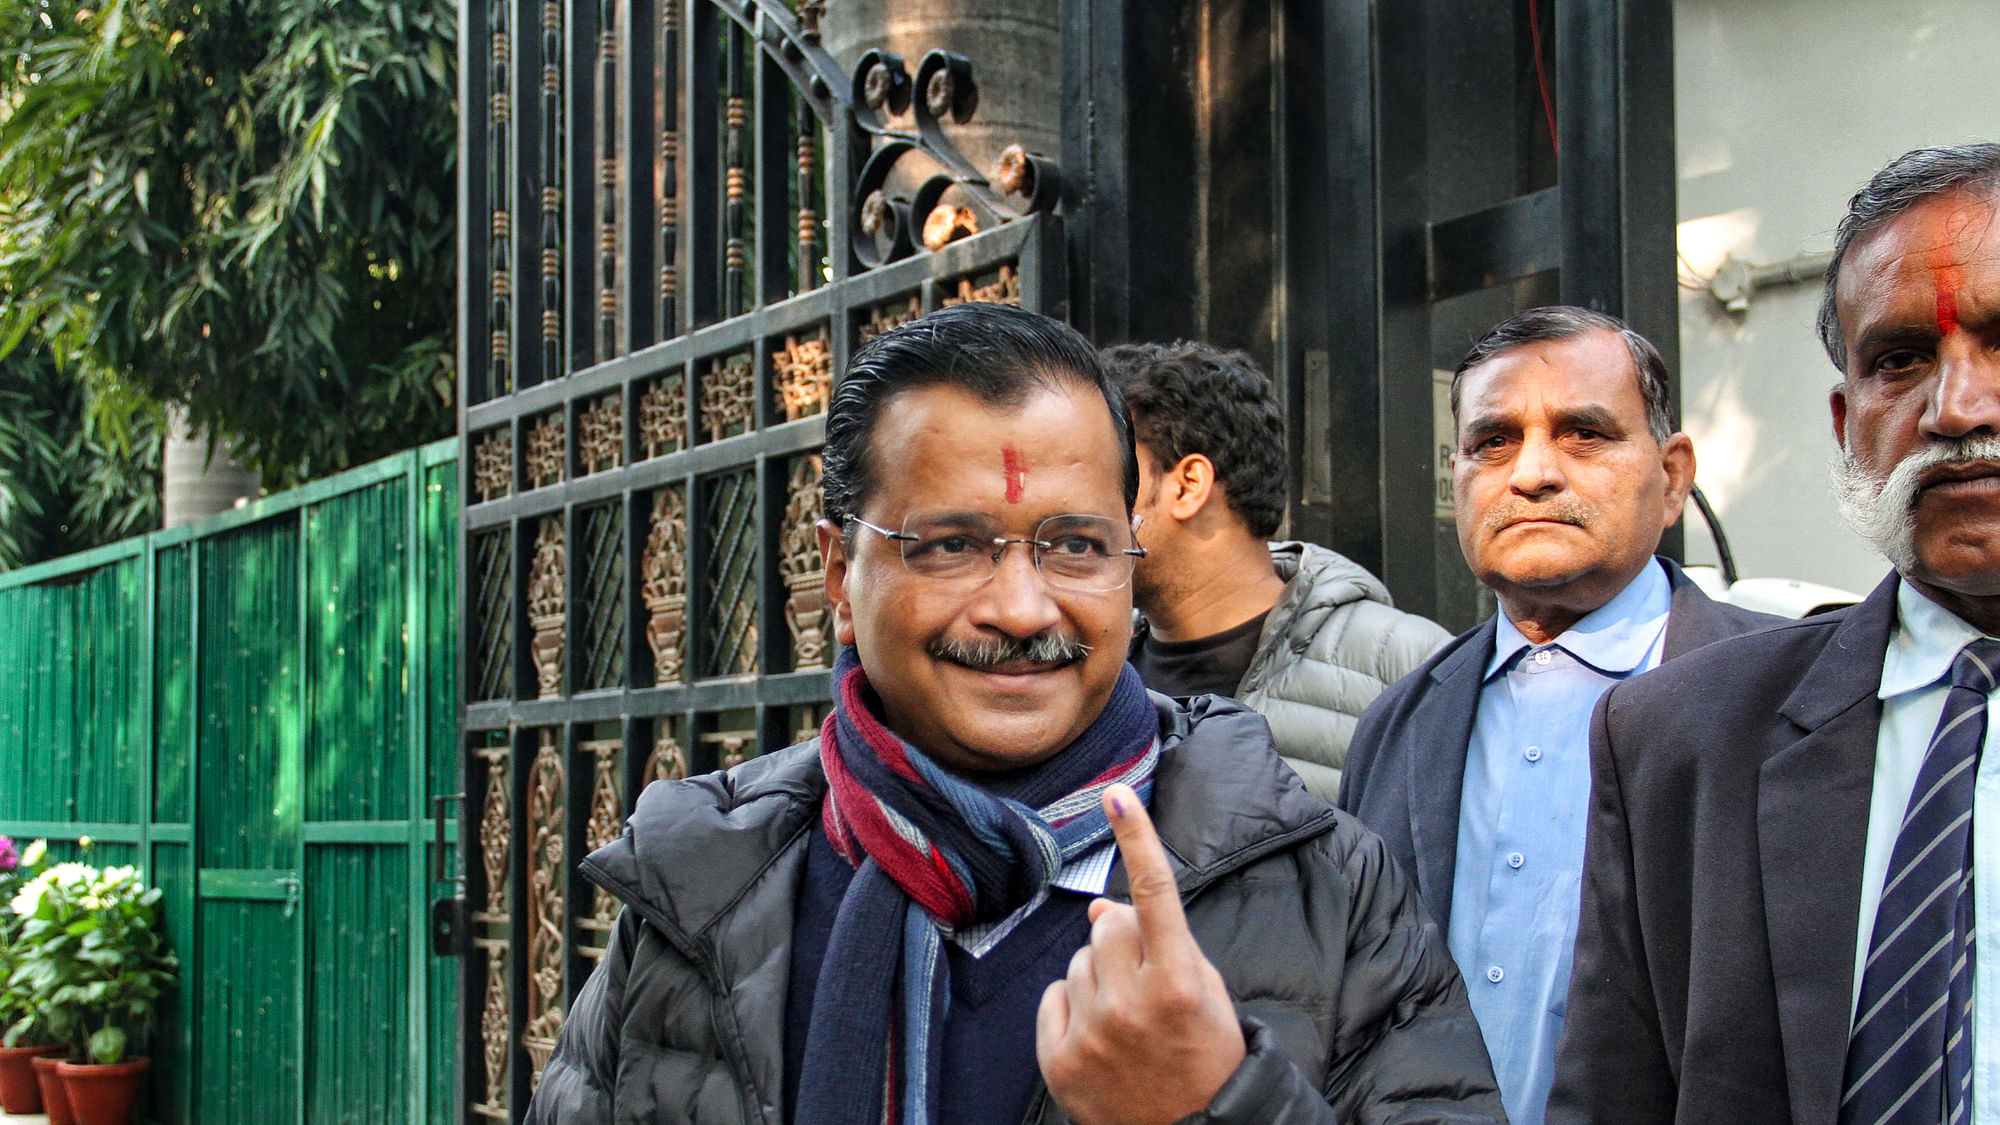 Delhi Chief Minister and AAP convenor Arvind Kejriwal shows his inked finger as he emerges from a polling station in the Civil Lines area after casting his vote for the Assembly elections, in New Delhi, Saturday.